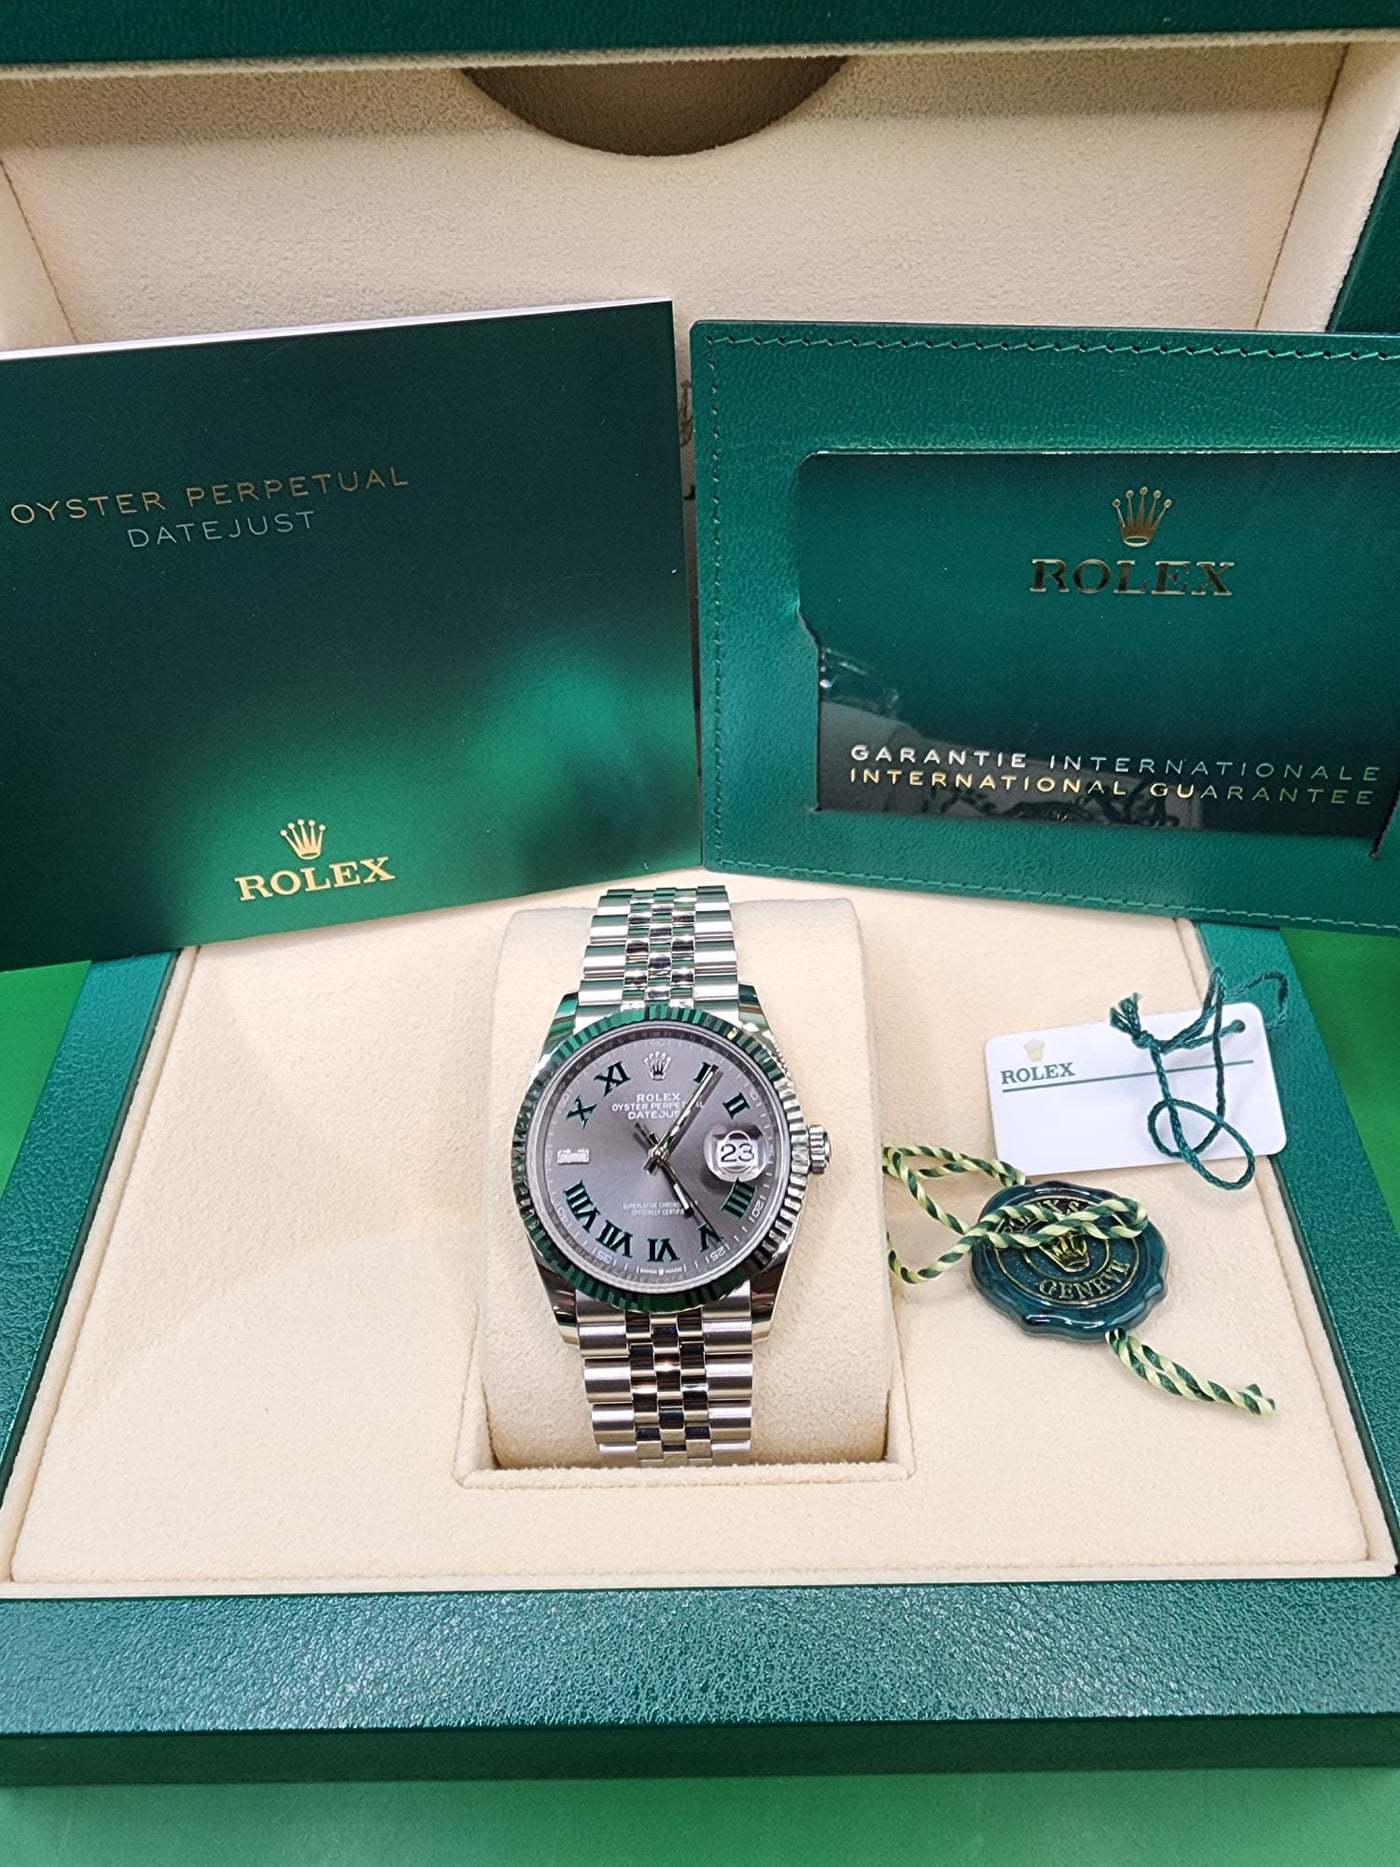 Rolex Datejust 36, Oyster, 36 mm, Oystersteel and white gold, Wimbledon Dial, Jubilee Bracelet, 126234